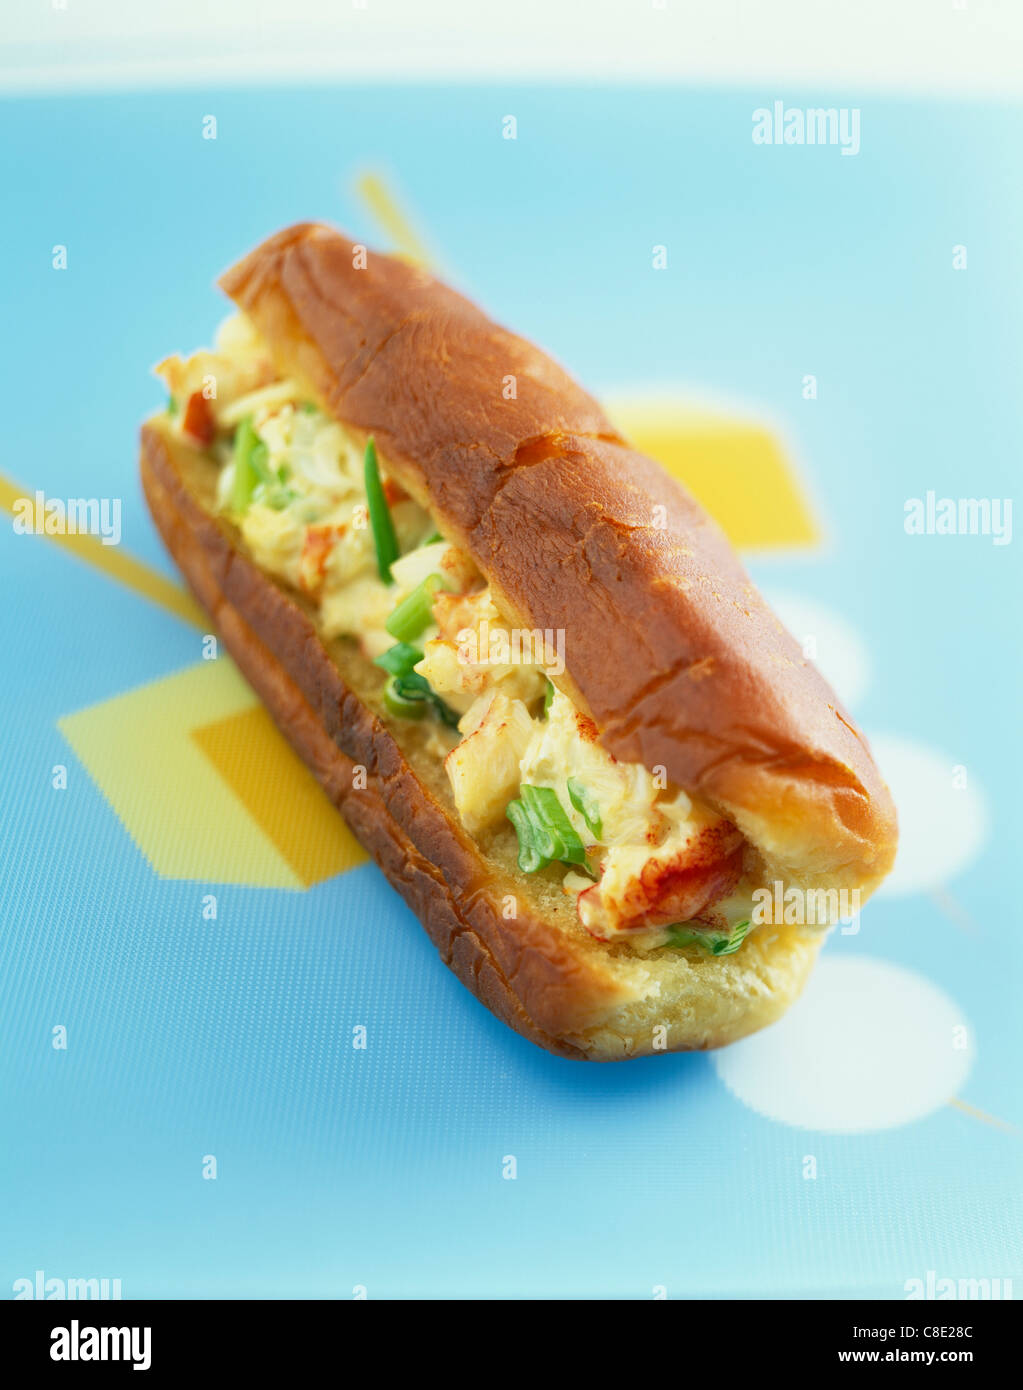 Chic lobster hot dog Stock Photo